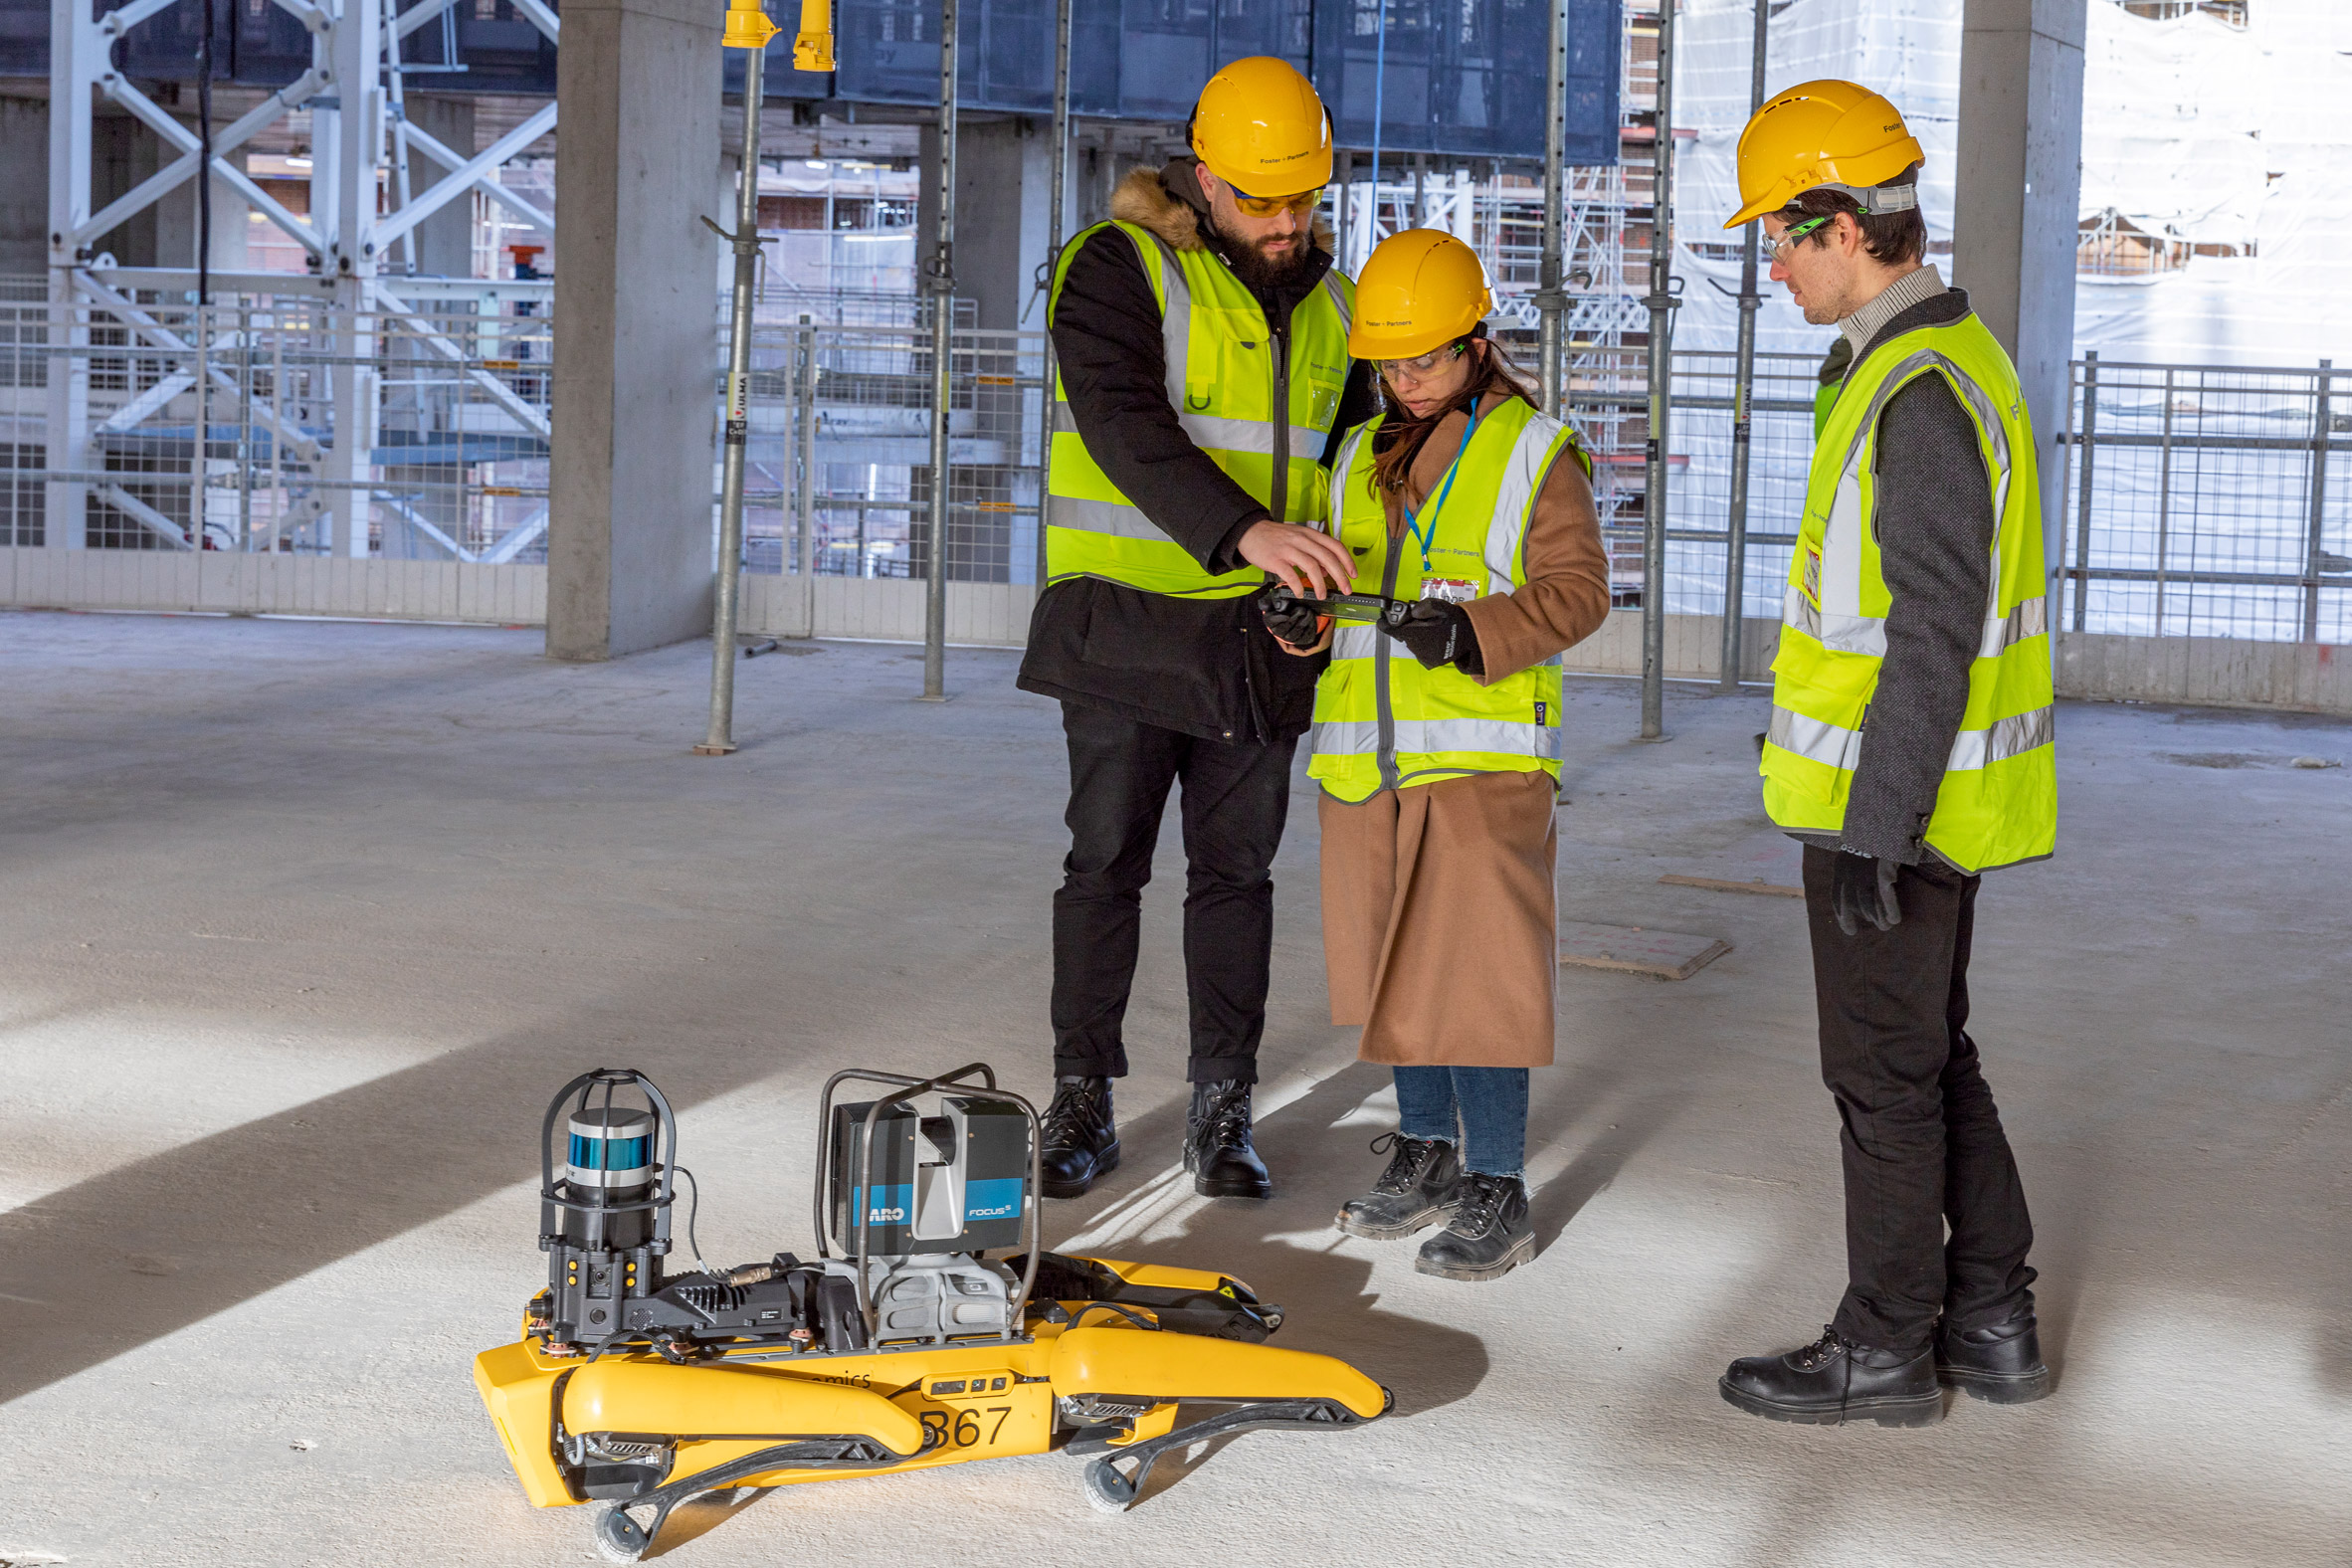 Architects use Spot the robot to scan the construction site